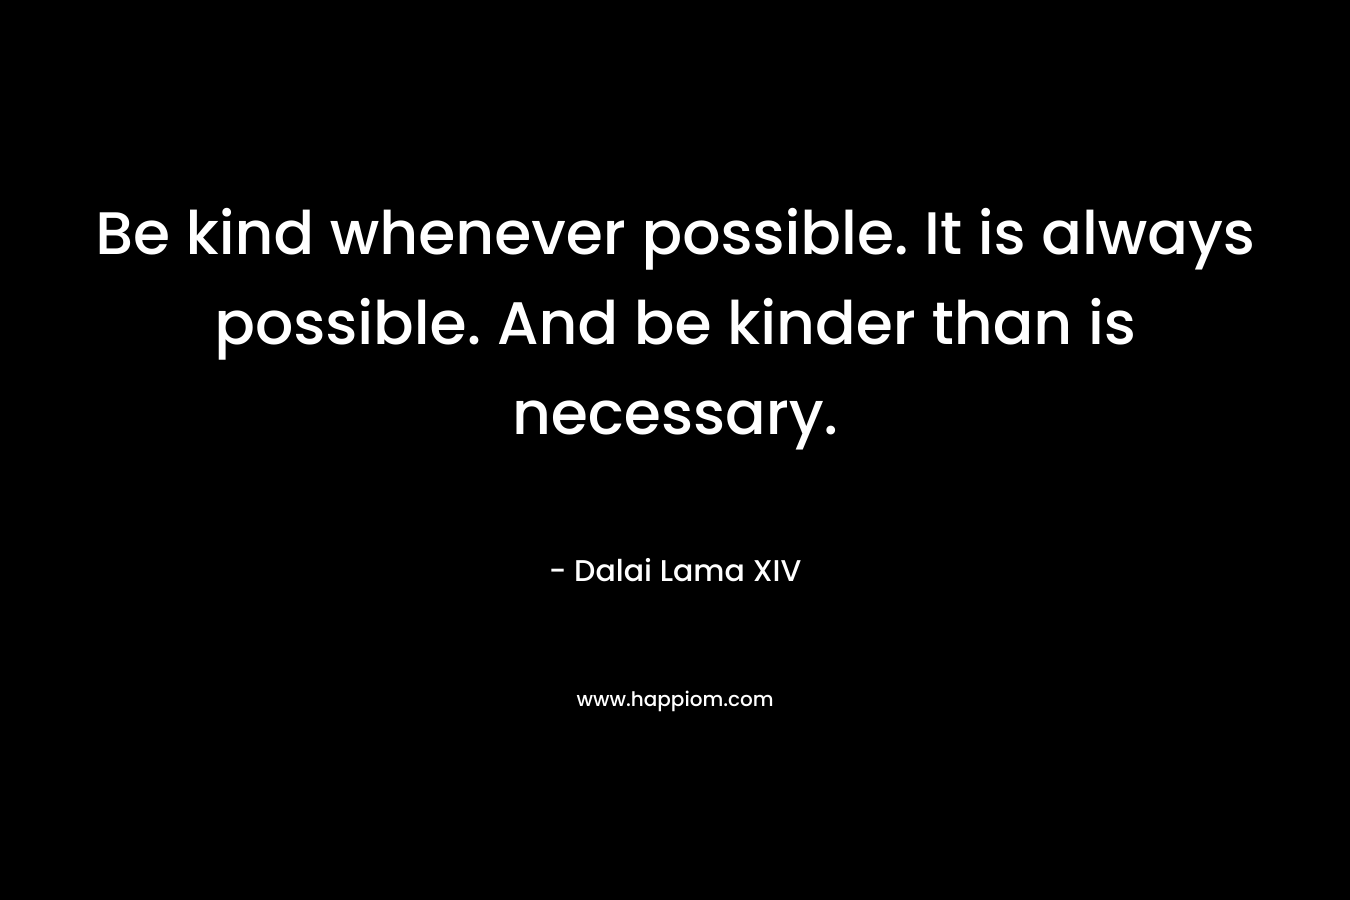 Be kind whenever possible. It is always possible. And be kinder than is necessary. – Dalai Lama XIV